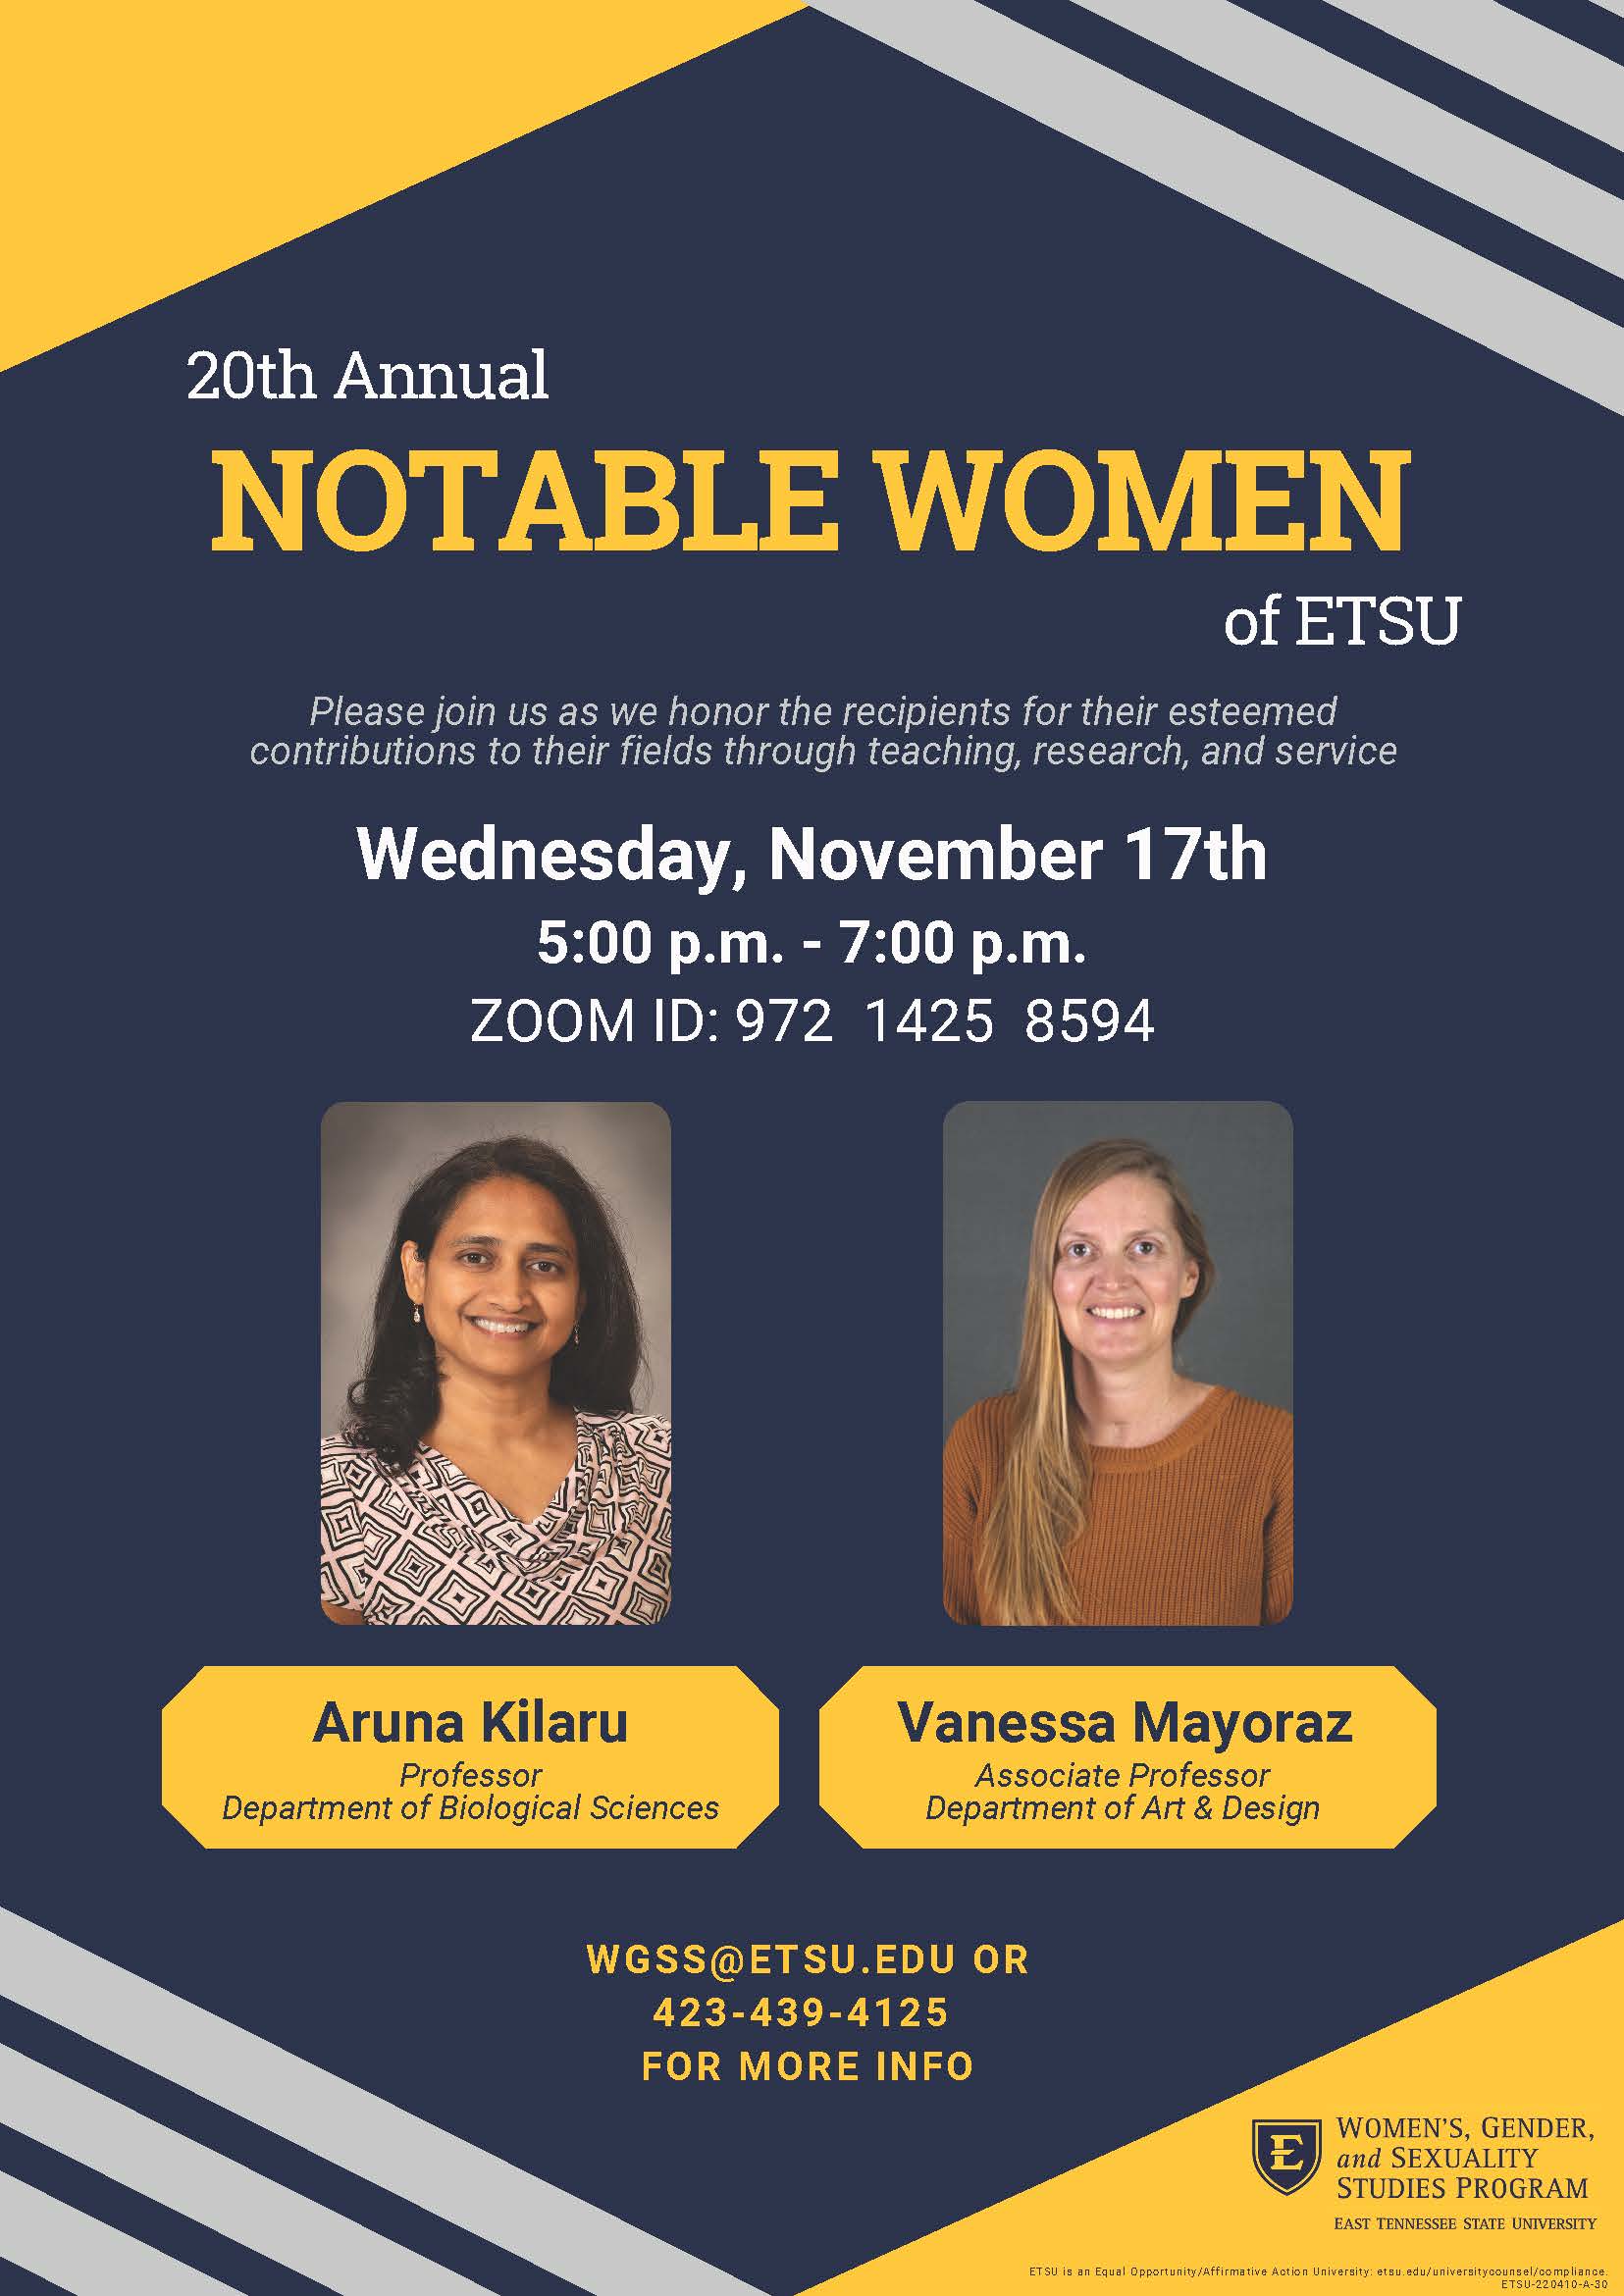 Notible Women of ETSU poster with event information in the commentary above.